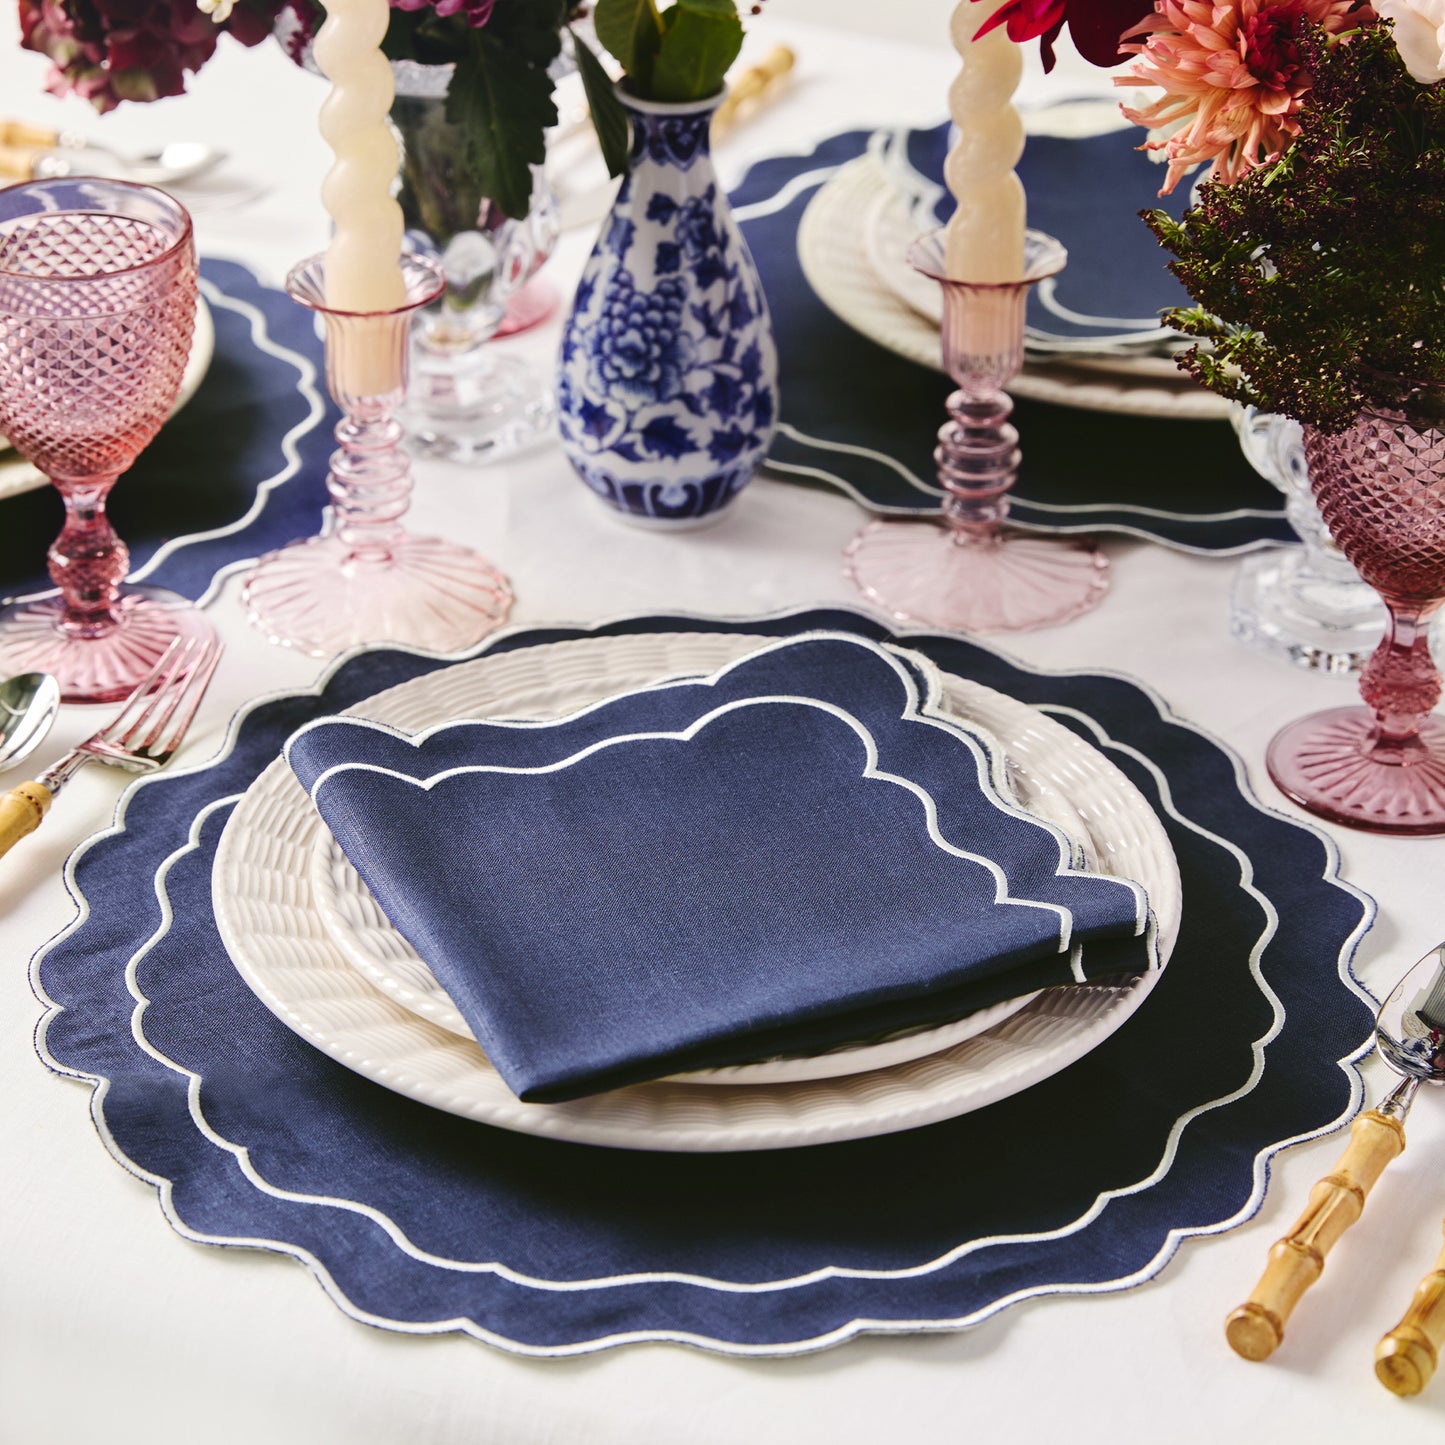 Set of 4 - Pure Linen Scalloped Edged Placemat - Oxford Blue